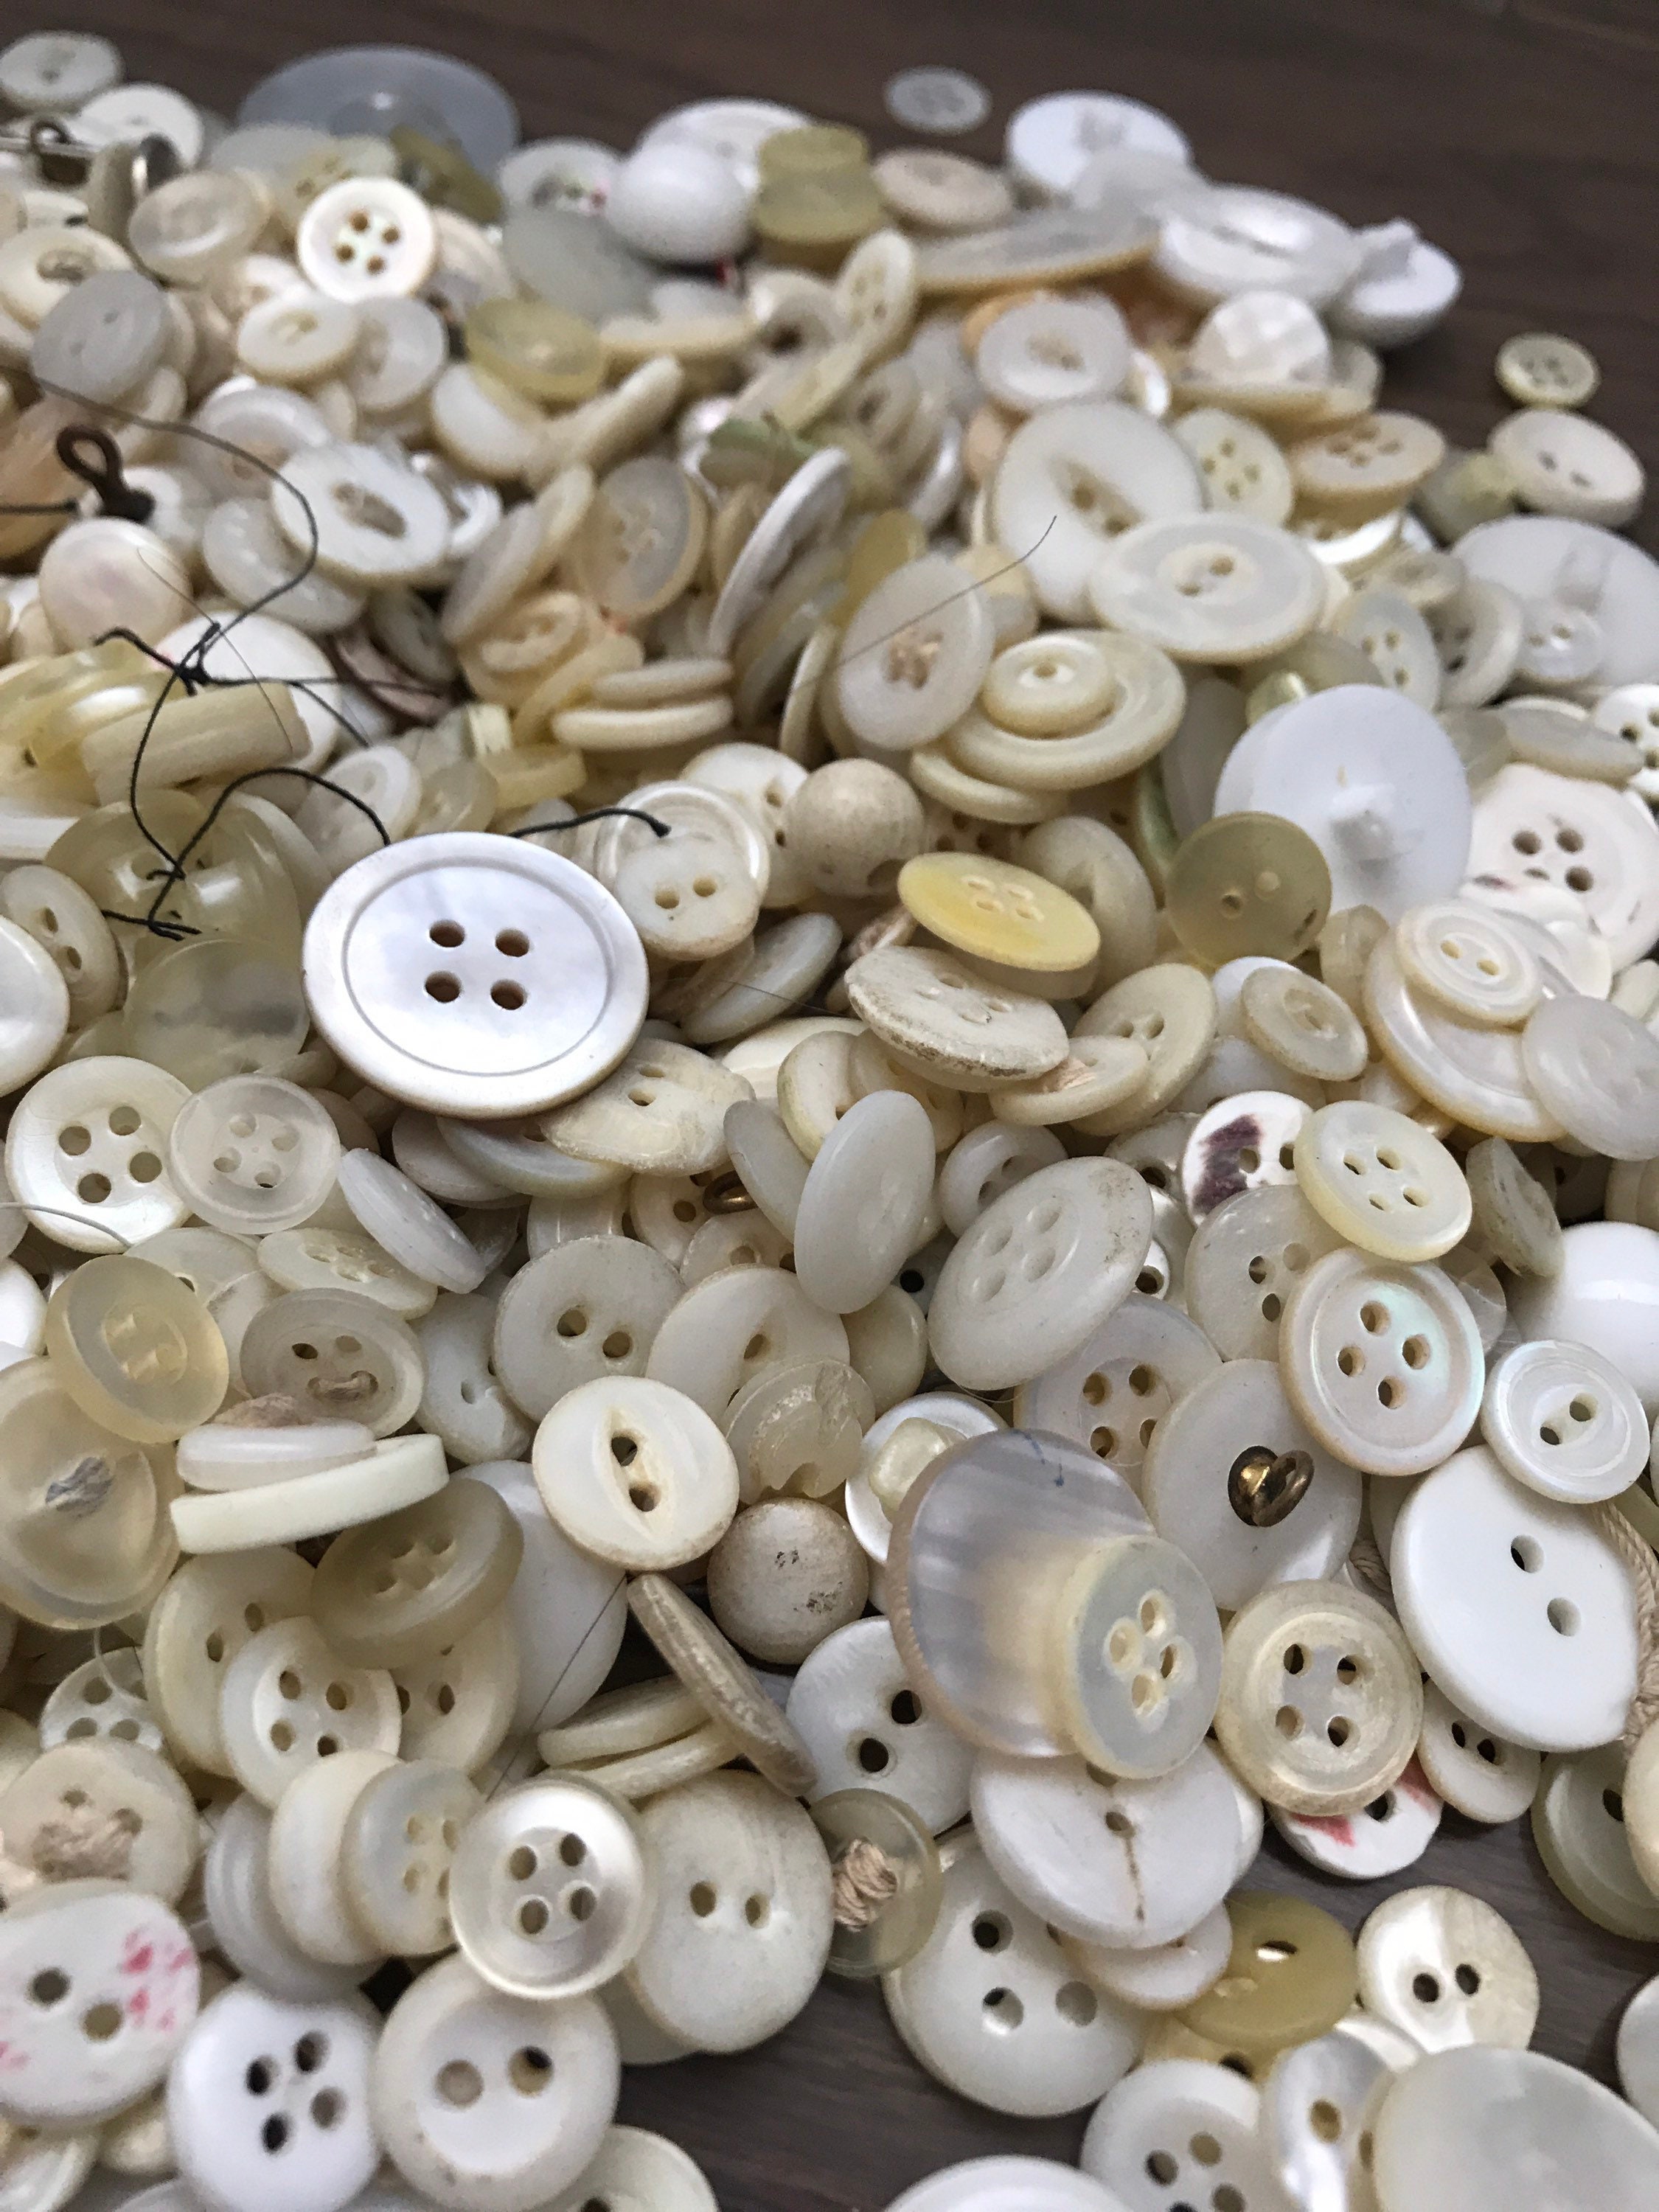 Esoca 650pcs White Buttons in Bulk Assorted White Craft Buttons Mixed White Buttons for Crafts Button White for Crafting